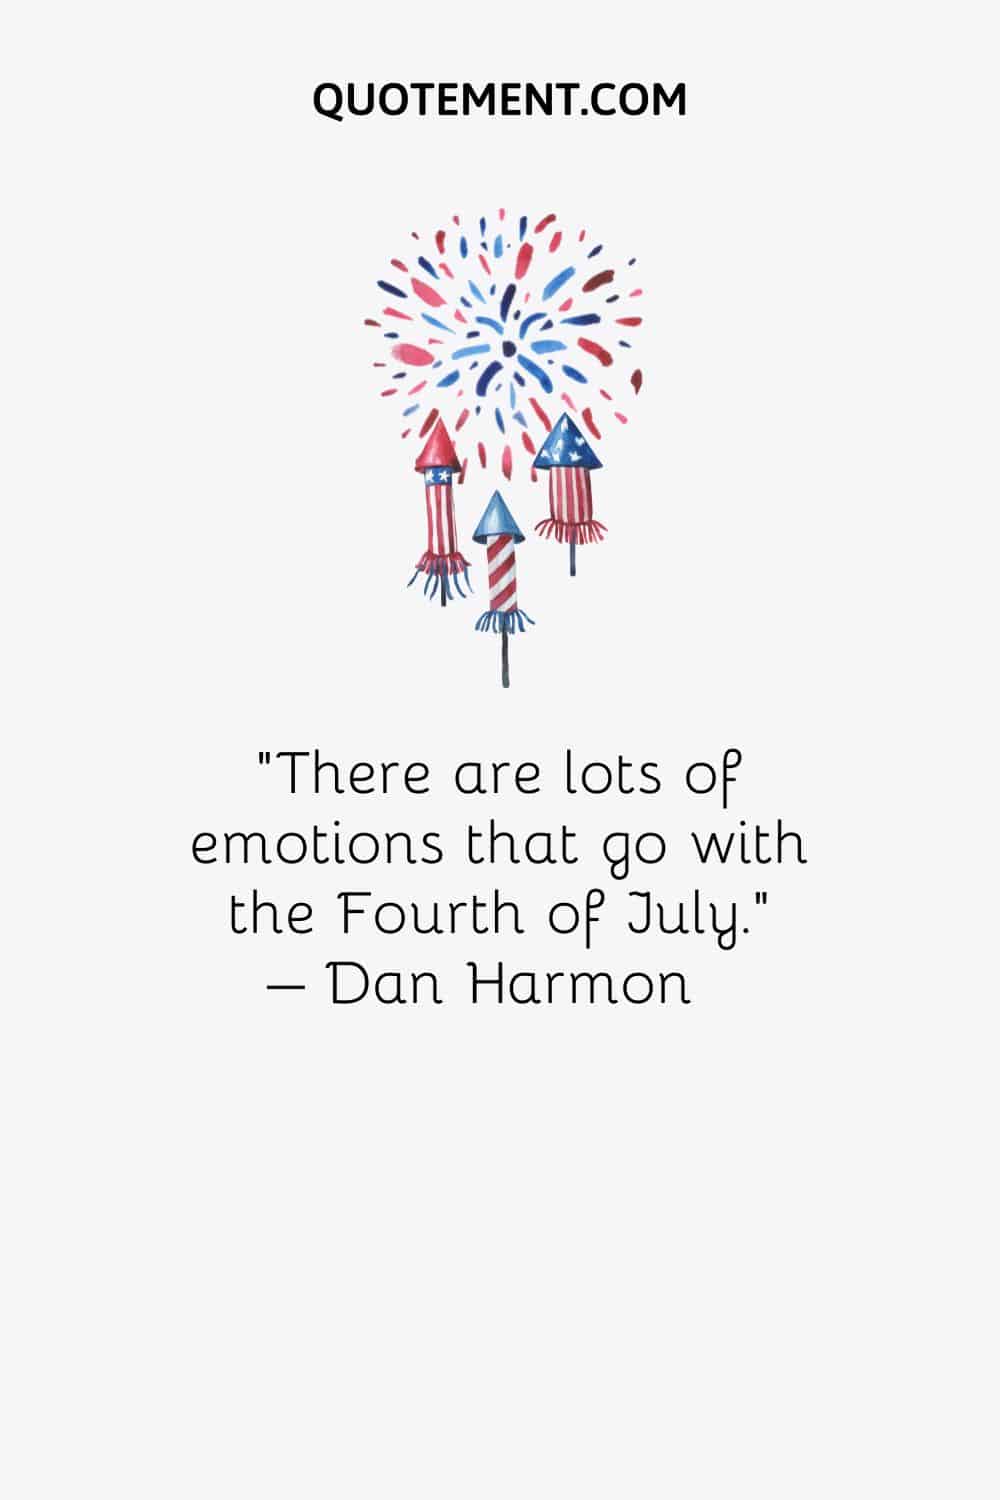 There are lots of emotions that go with the Fourth of July. – Dan Harmon